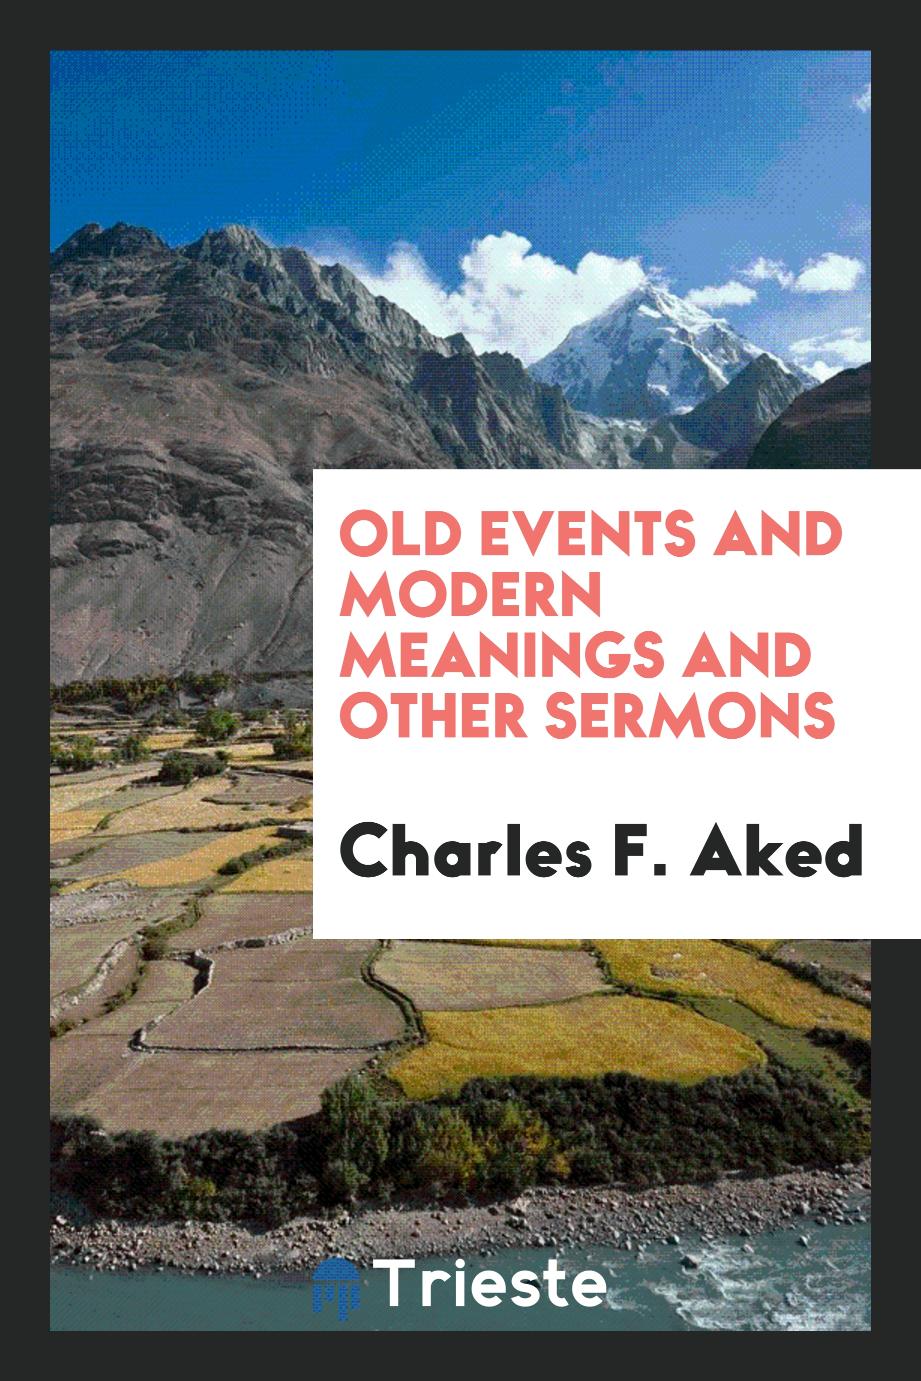 Charles F. Aked - Old Events and Modern Meanings and Other Sermons